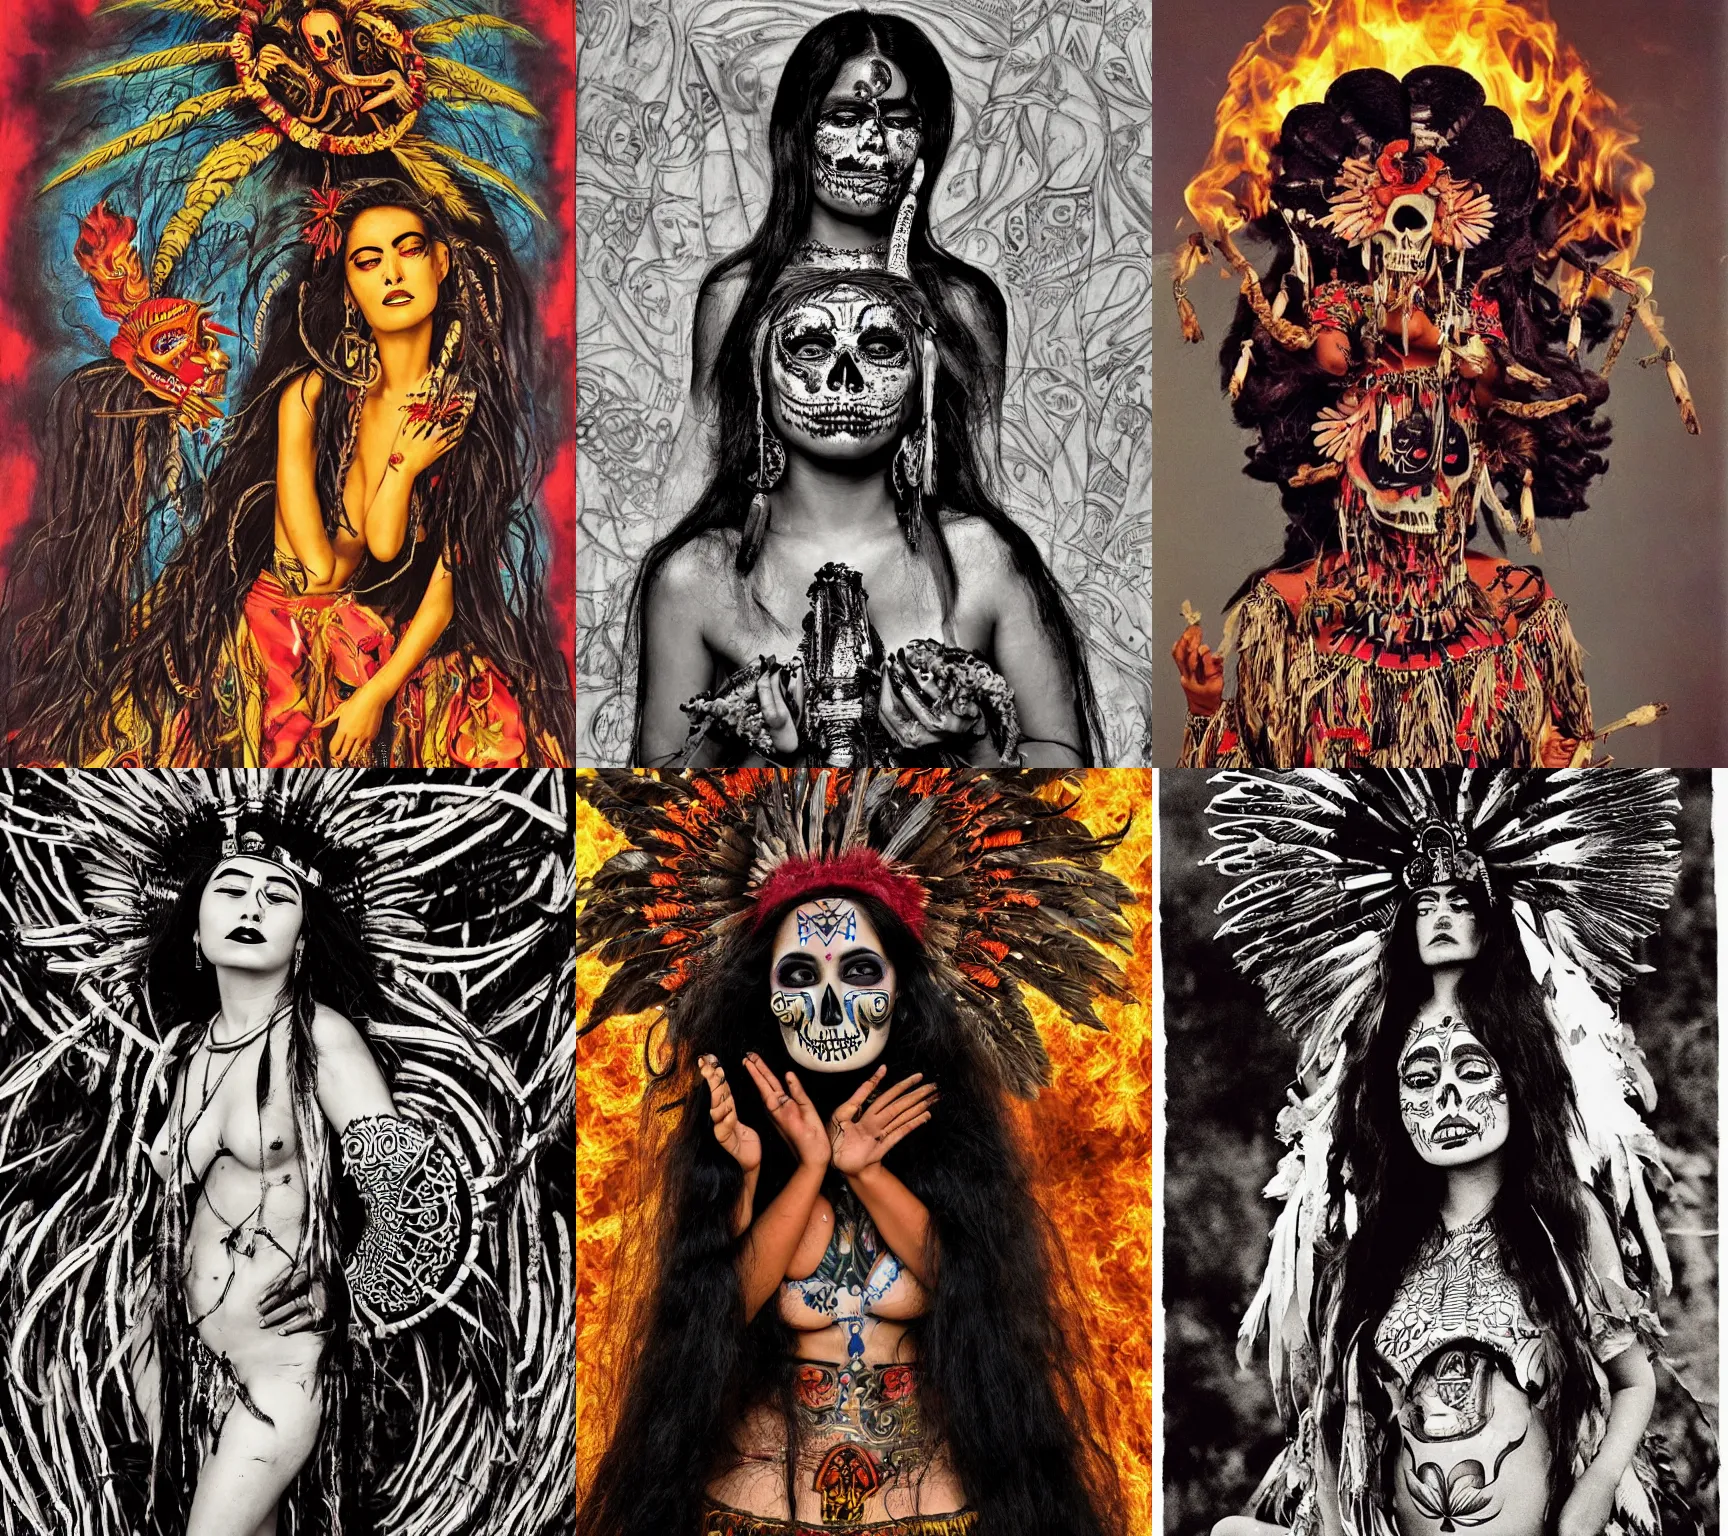 Prompt: A beautiful Mexican goddess. She represents death and fertility. She appears as the Fire Goddess, and a young beautiful Indigenous Mexican woman. In the style of Big Daddy Roth aesthetic, contemporary art aesthetic, Andre Breton photographic aesthetic, mad magazine aesthetic